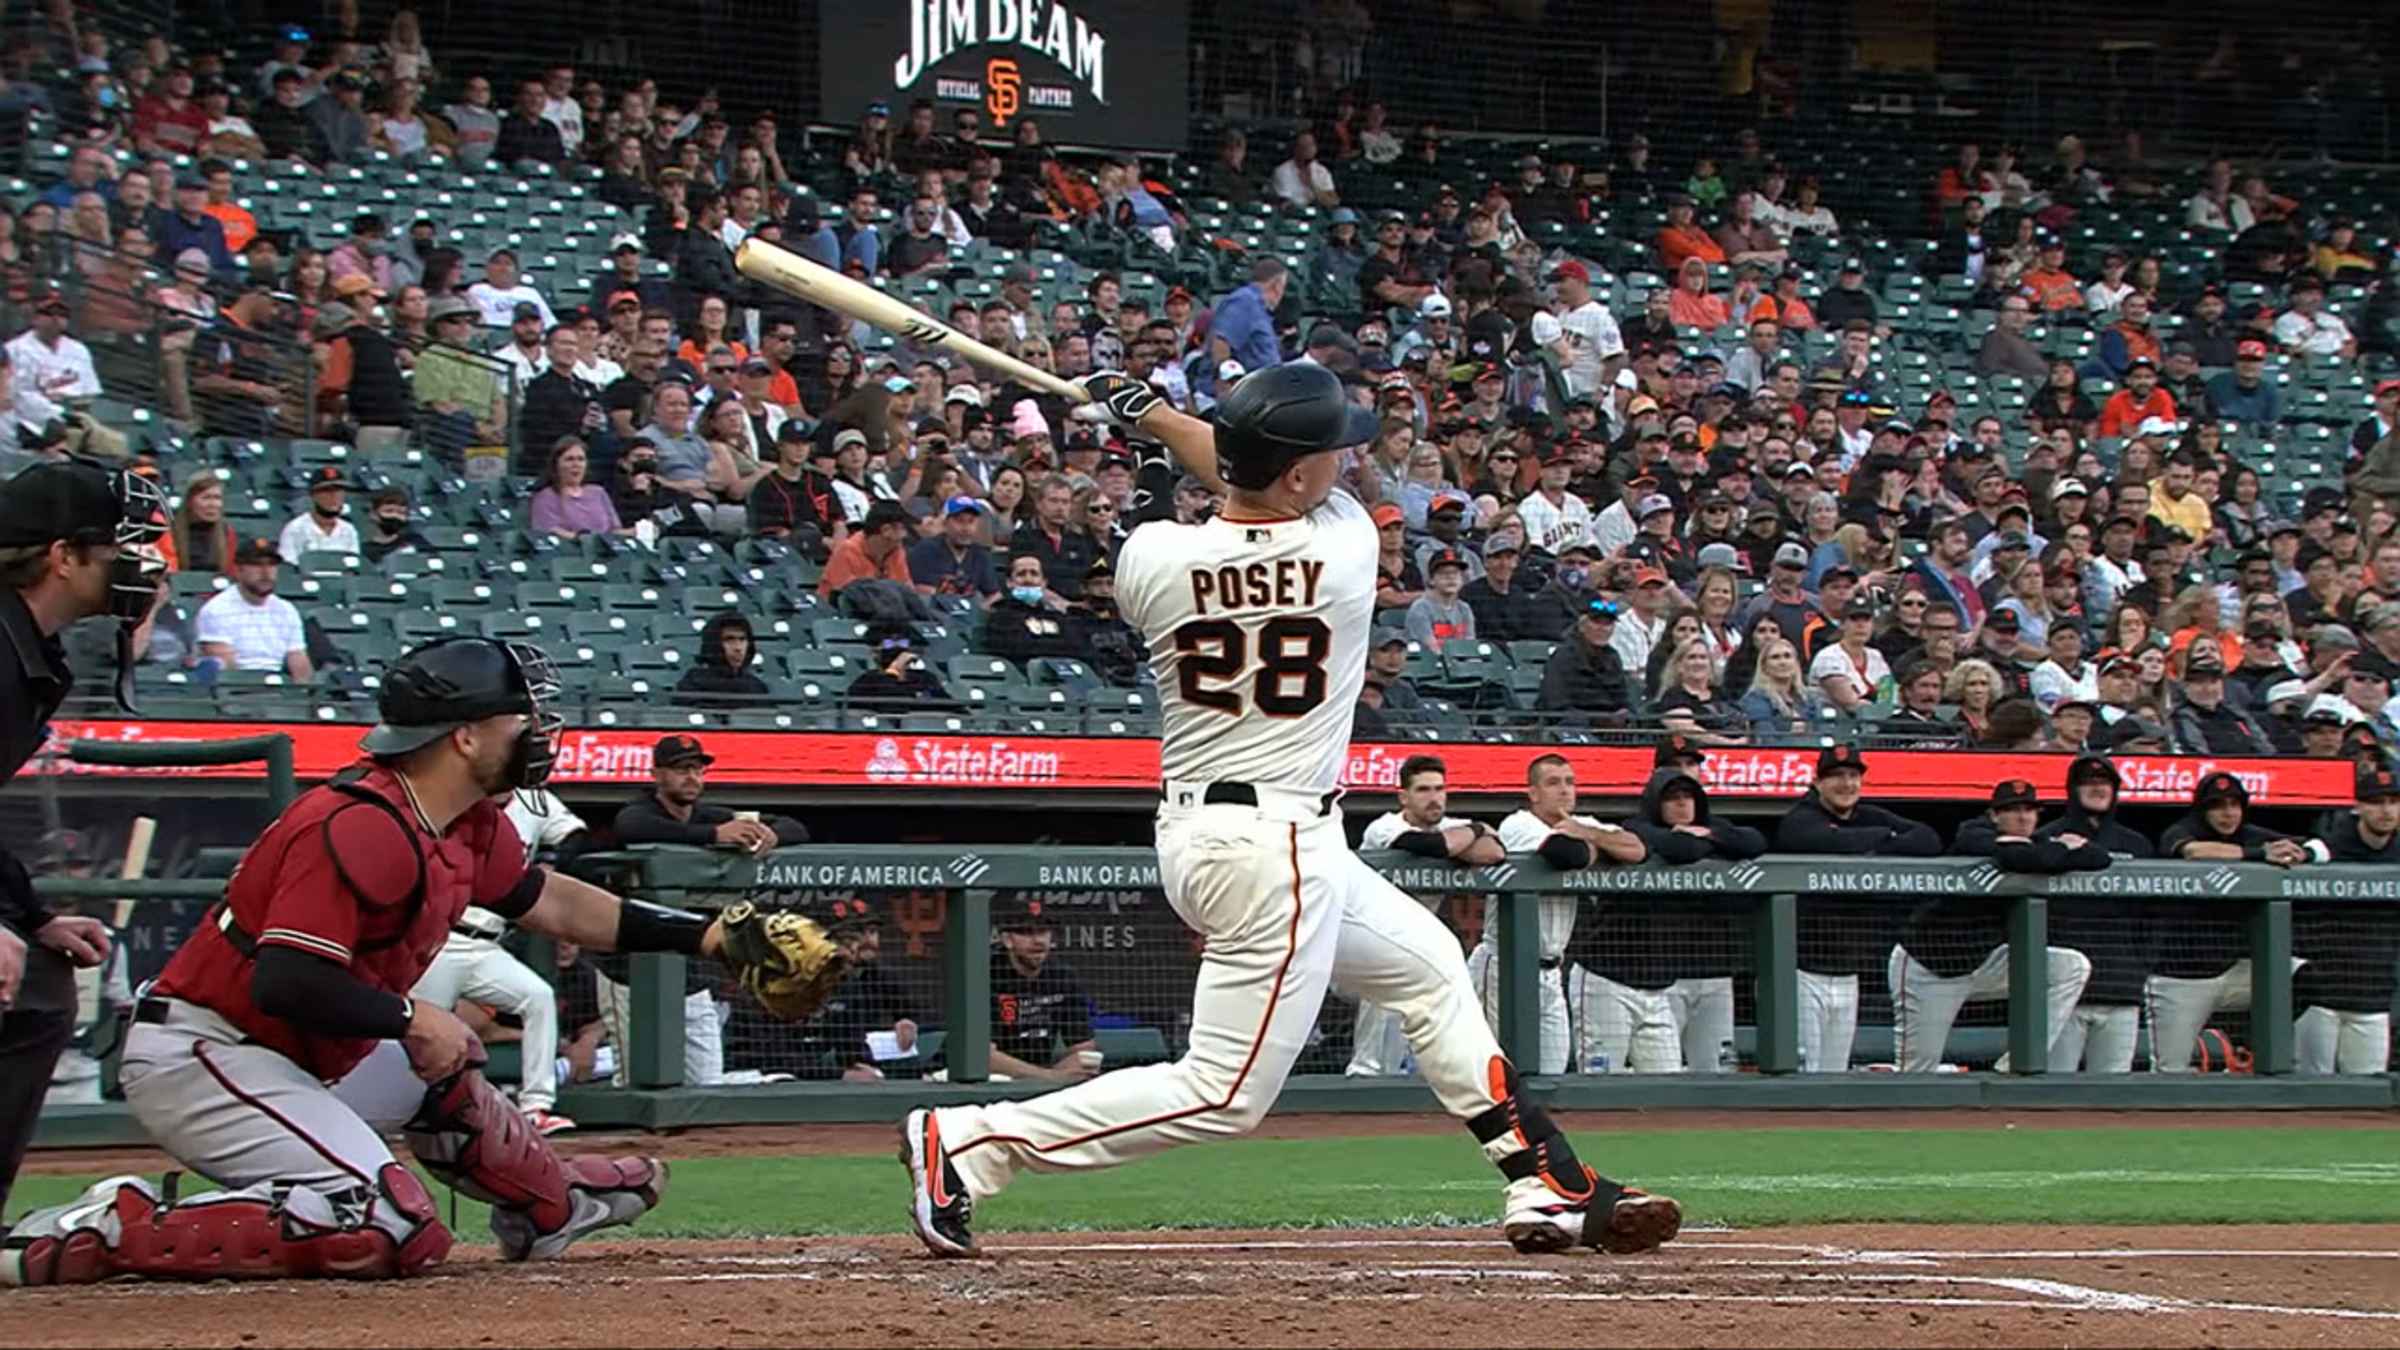 Buster Posey Game-Used Home Jersey worn during his 3 run homerun on 9/20/15  - HZ421466